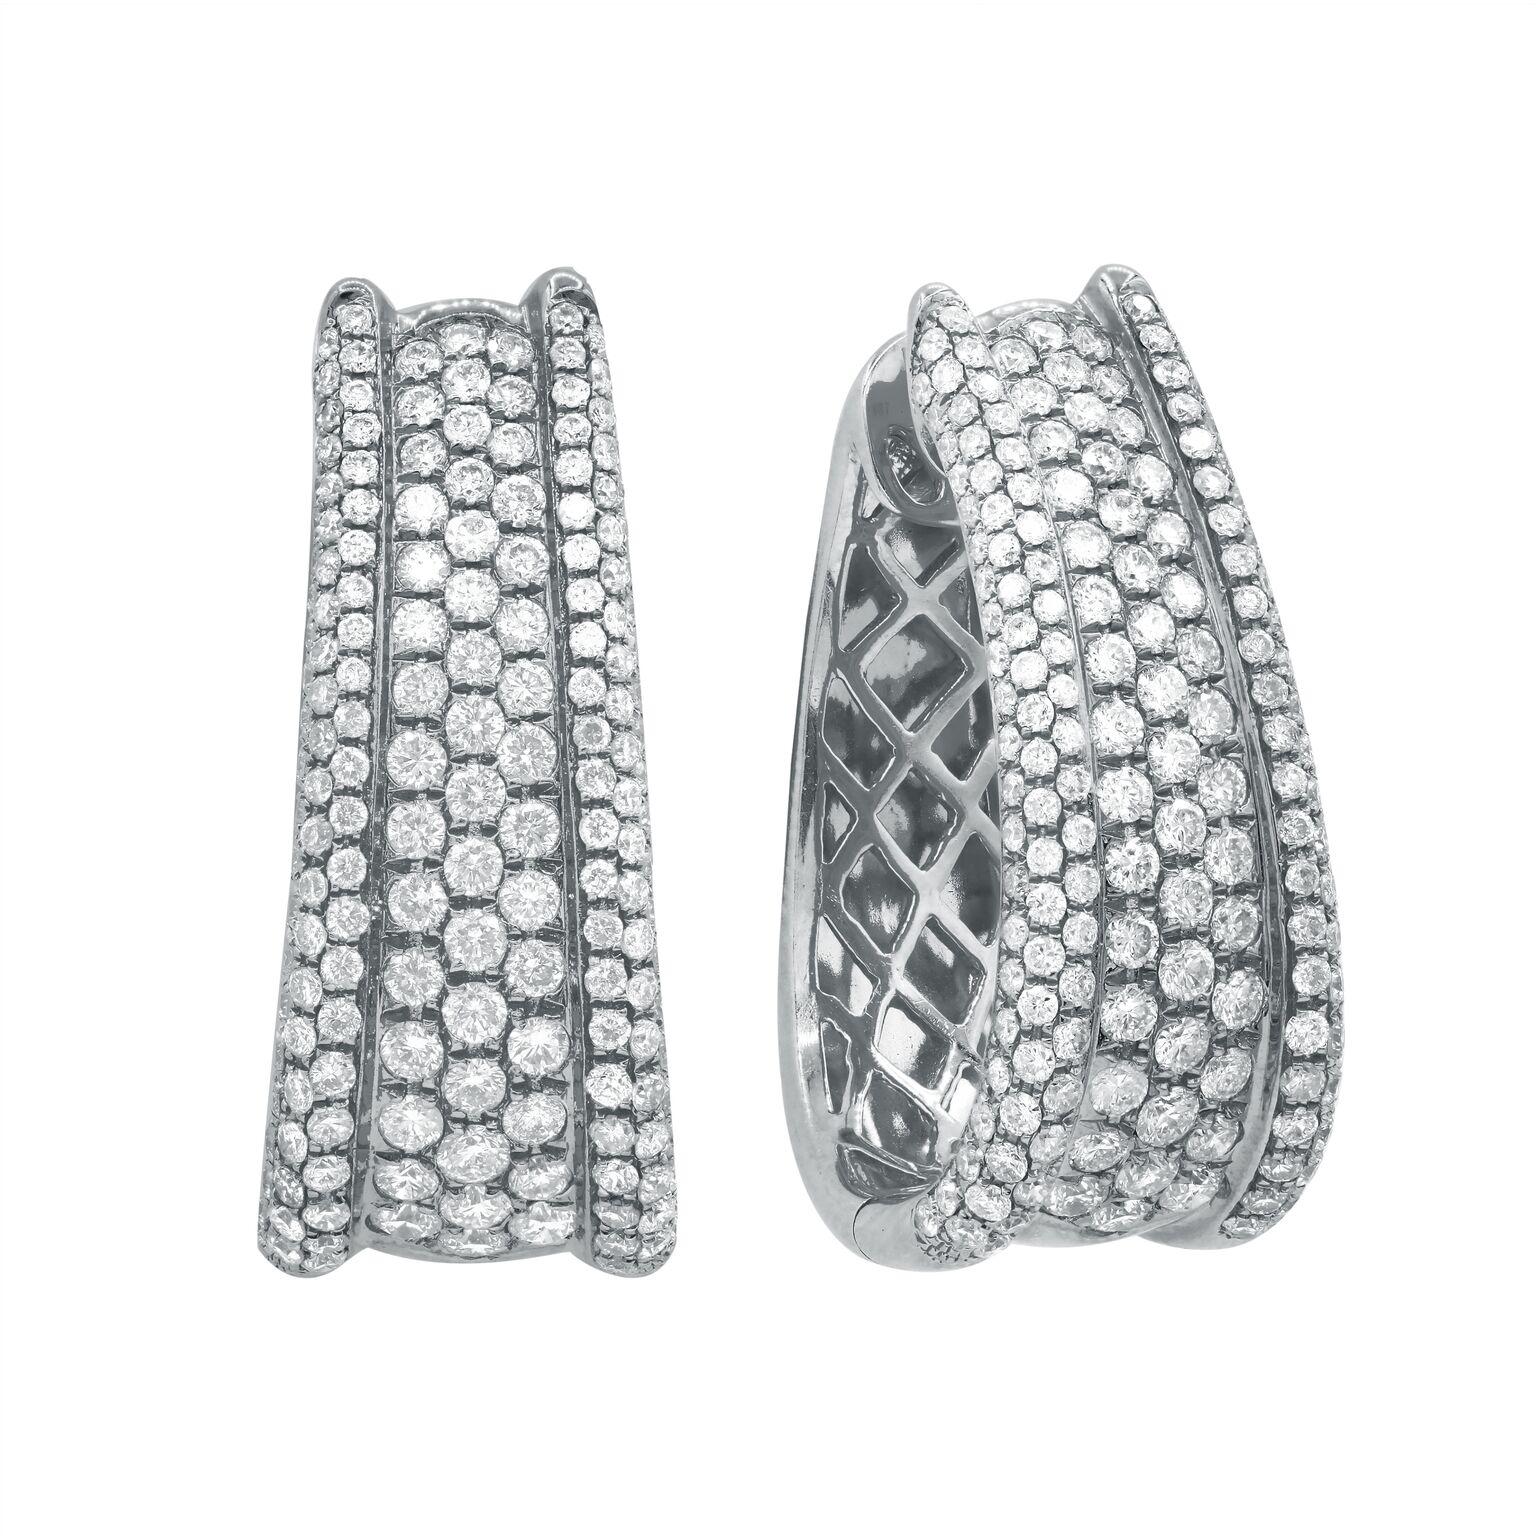 18K White Gold Diamond Earrings featuring 4.28 Carat T.W. of Natural Diamonds

Underline your look with this sharp 18K White Gold Diamond Earrings. High quality Diamonds. This Earrings will underline your exquisite look for any occasion.

. is a